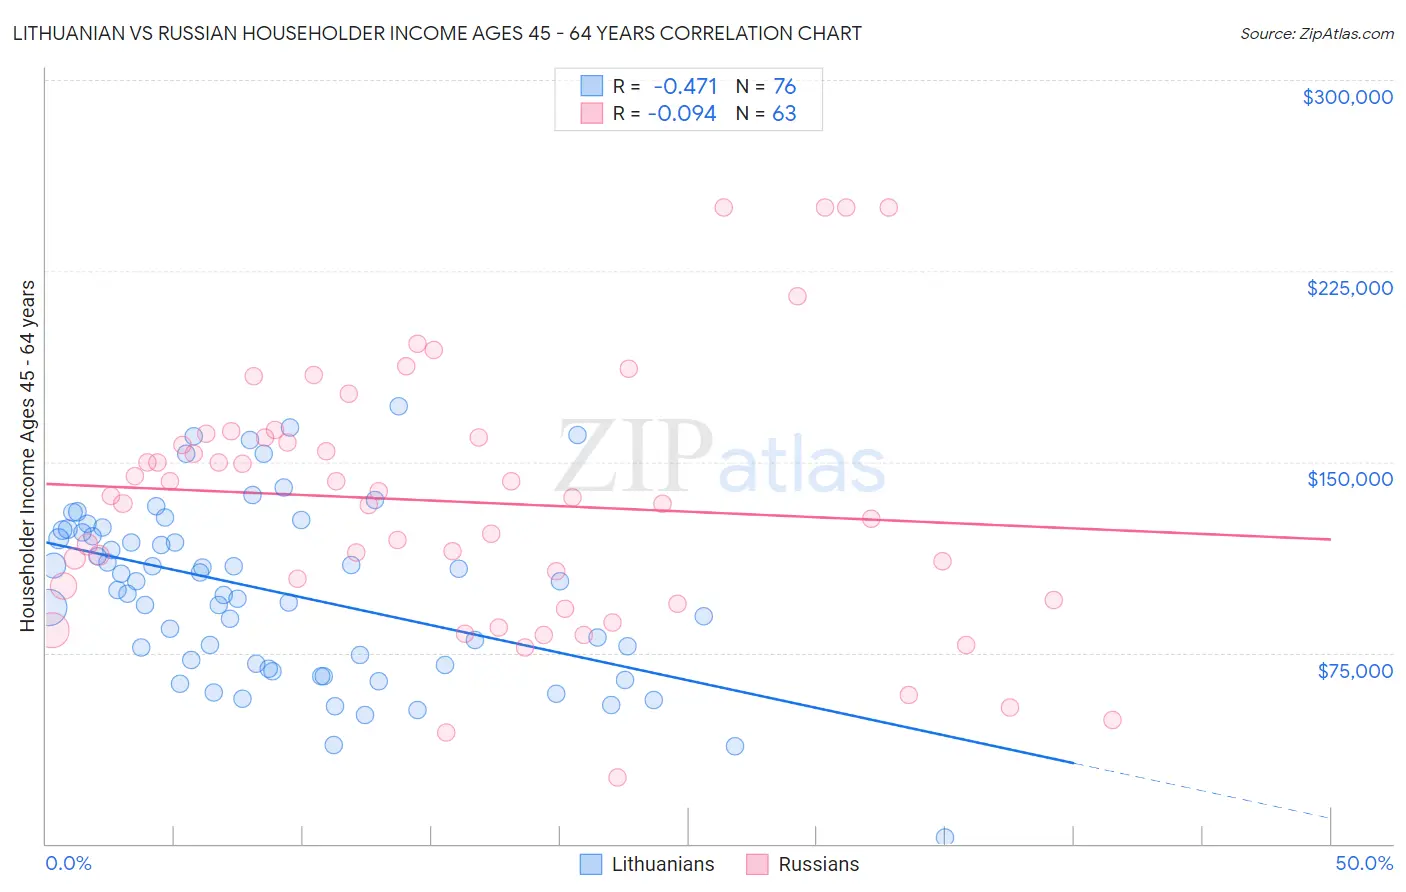 Lithuanian vs Russian Householder Income Ages 45 - 64 years